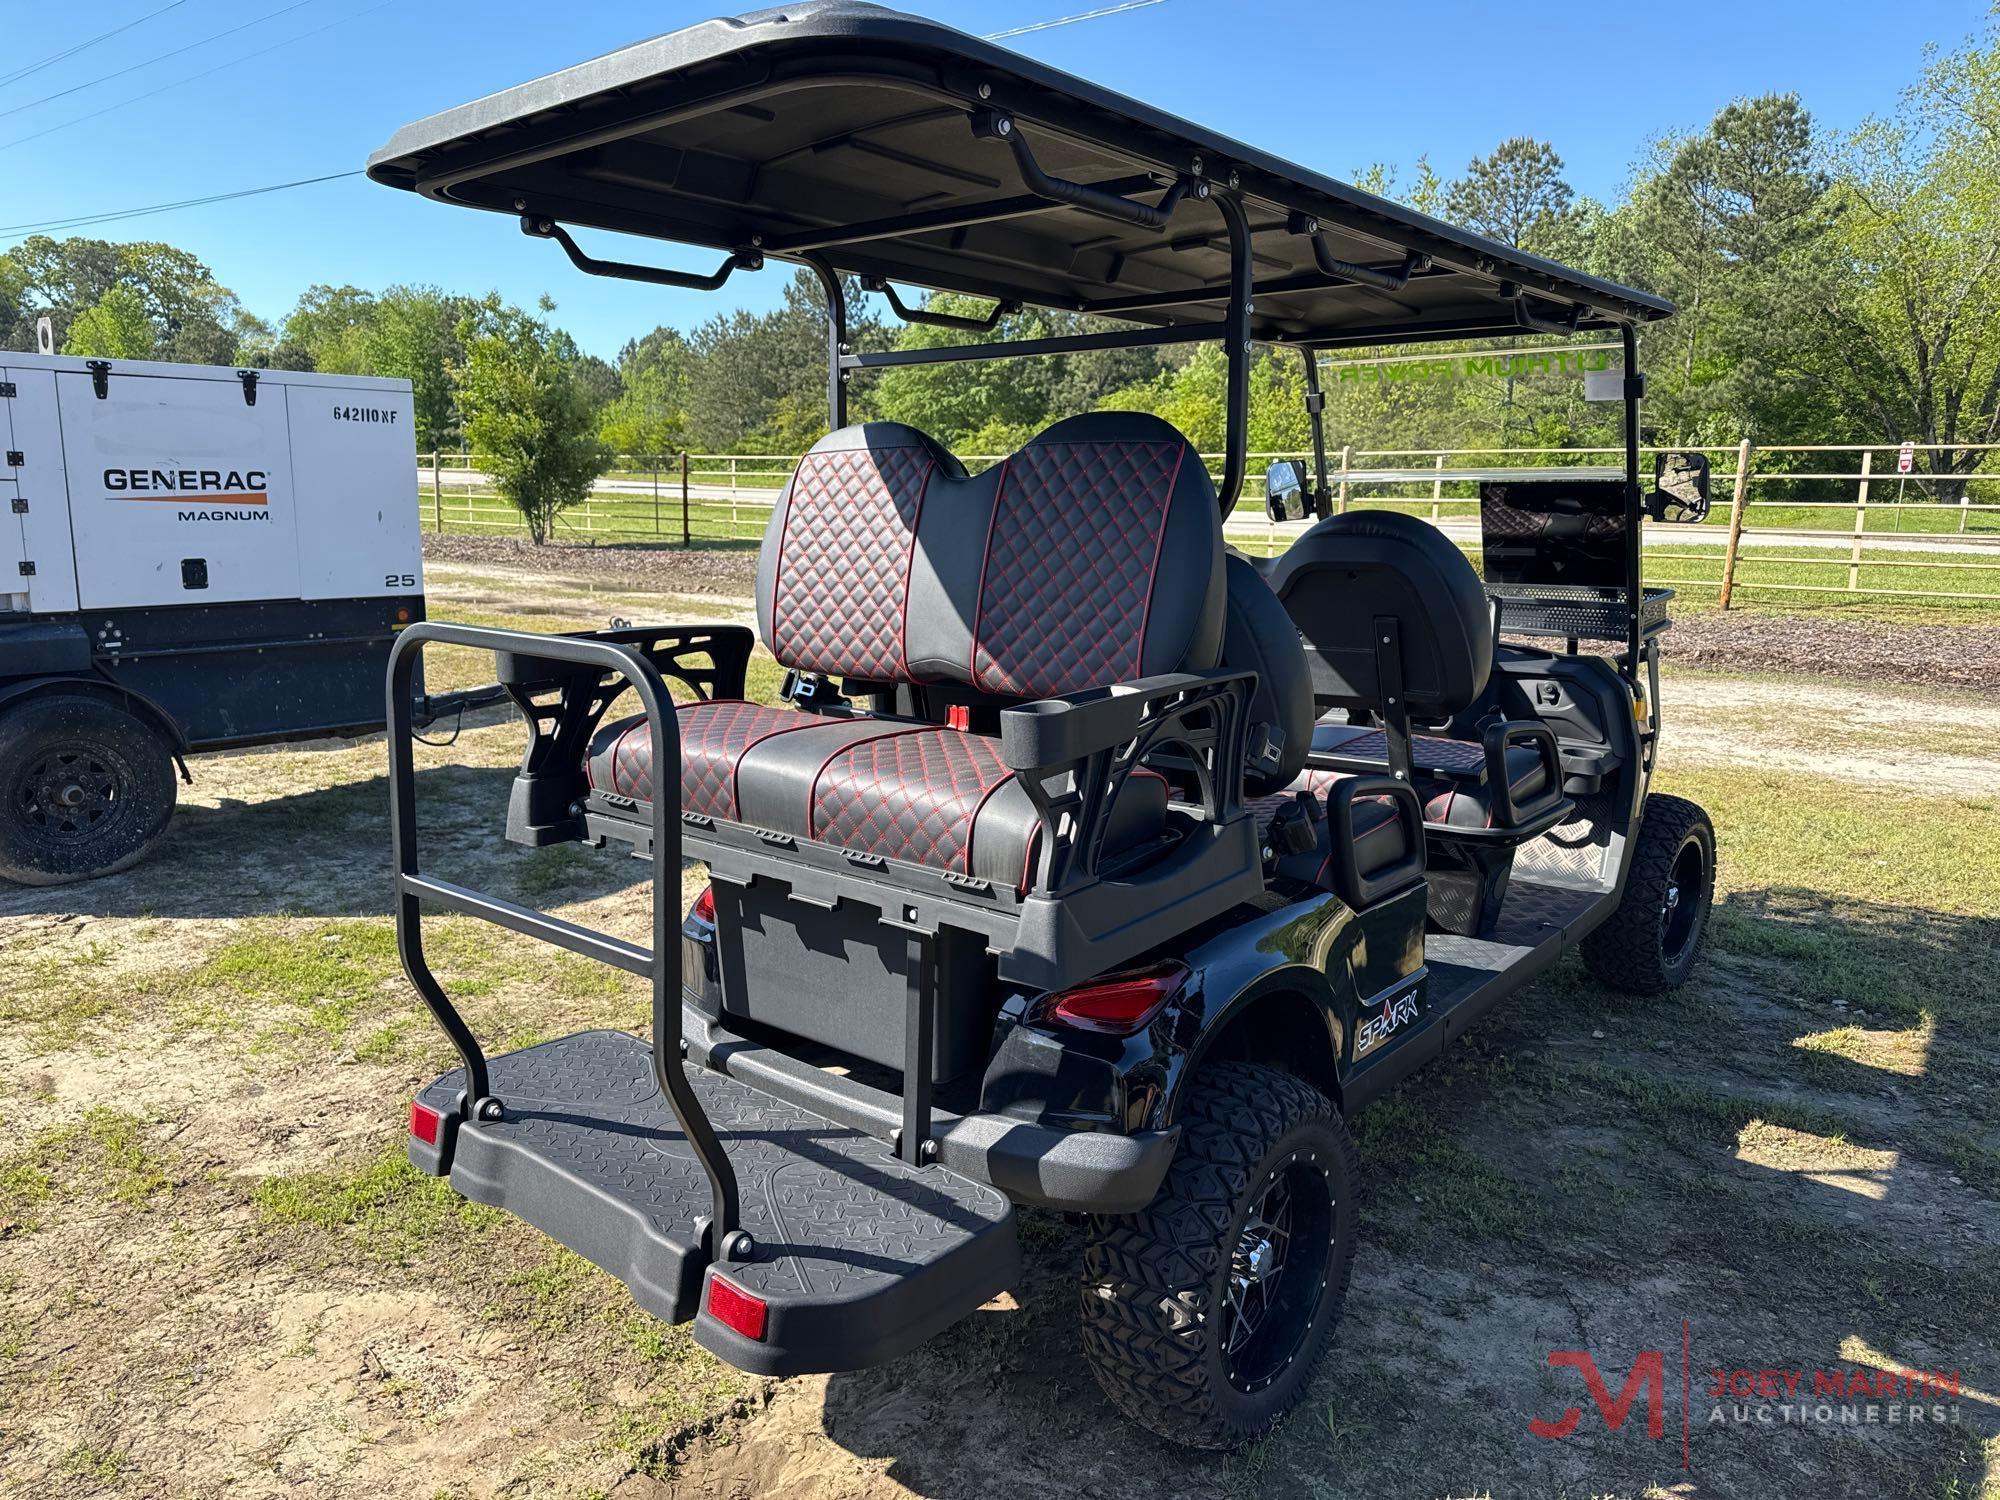 NEW SPARK 6-SEATER 48V ELECTRIC GOLF CART